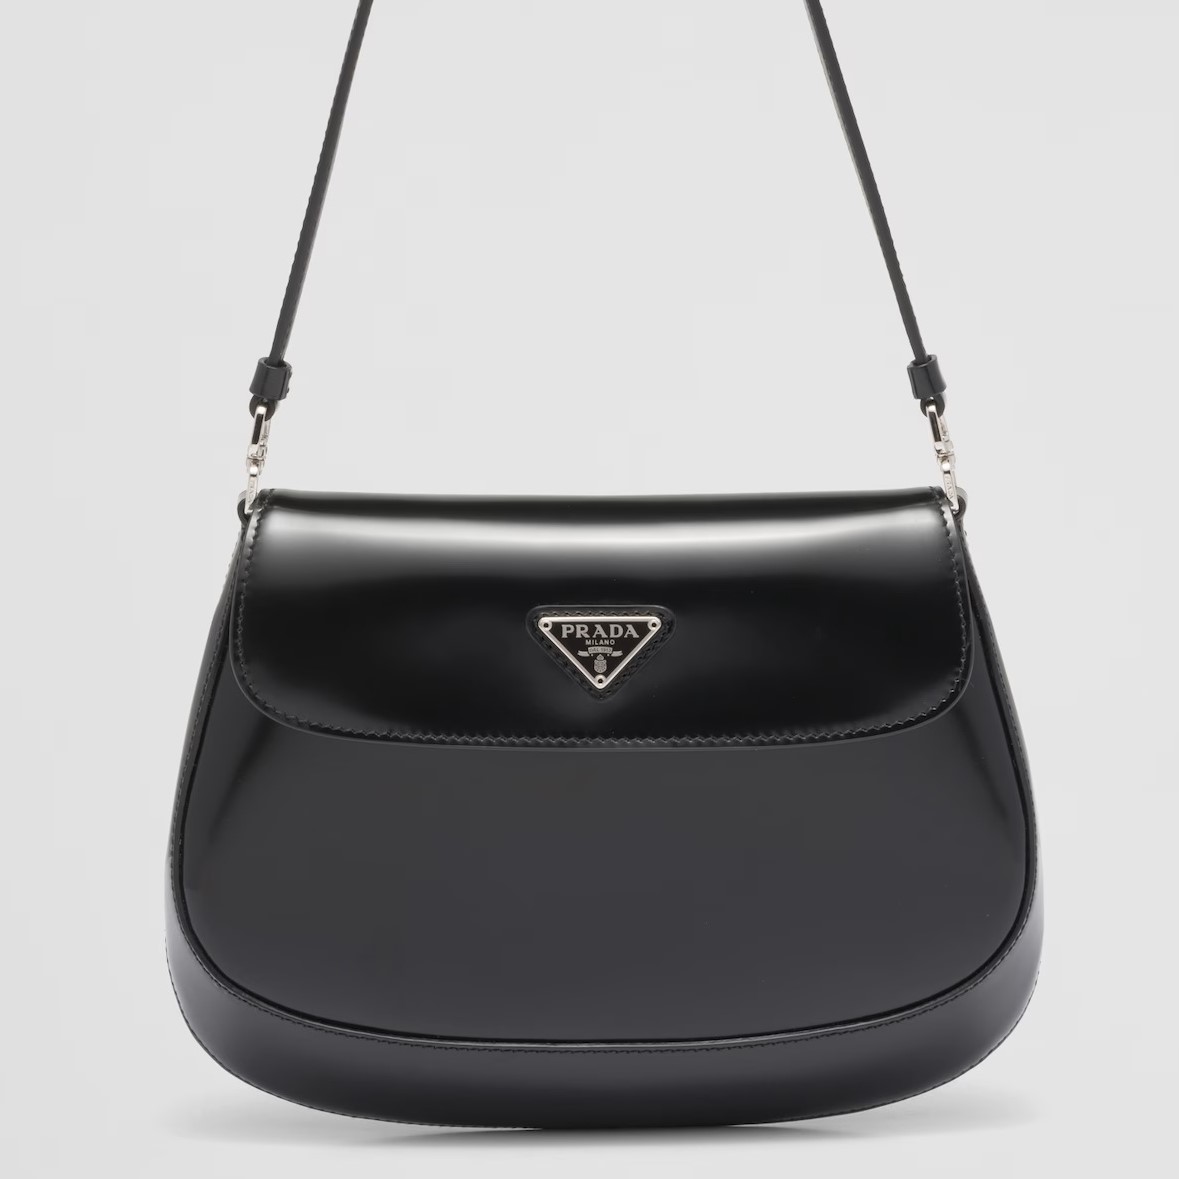 TÚI XÁCH PRADA CLEO BRUSHED LEATHER SHOULDER BAG WITH FLAP 20